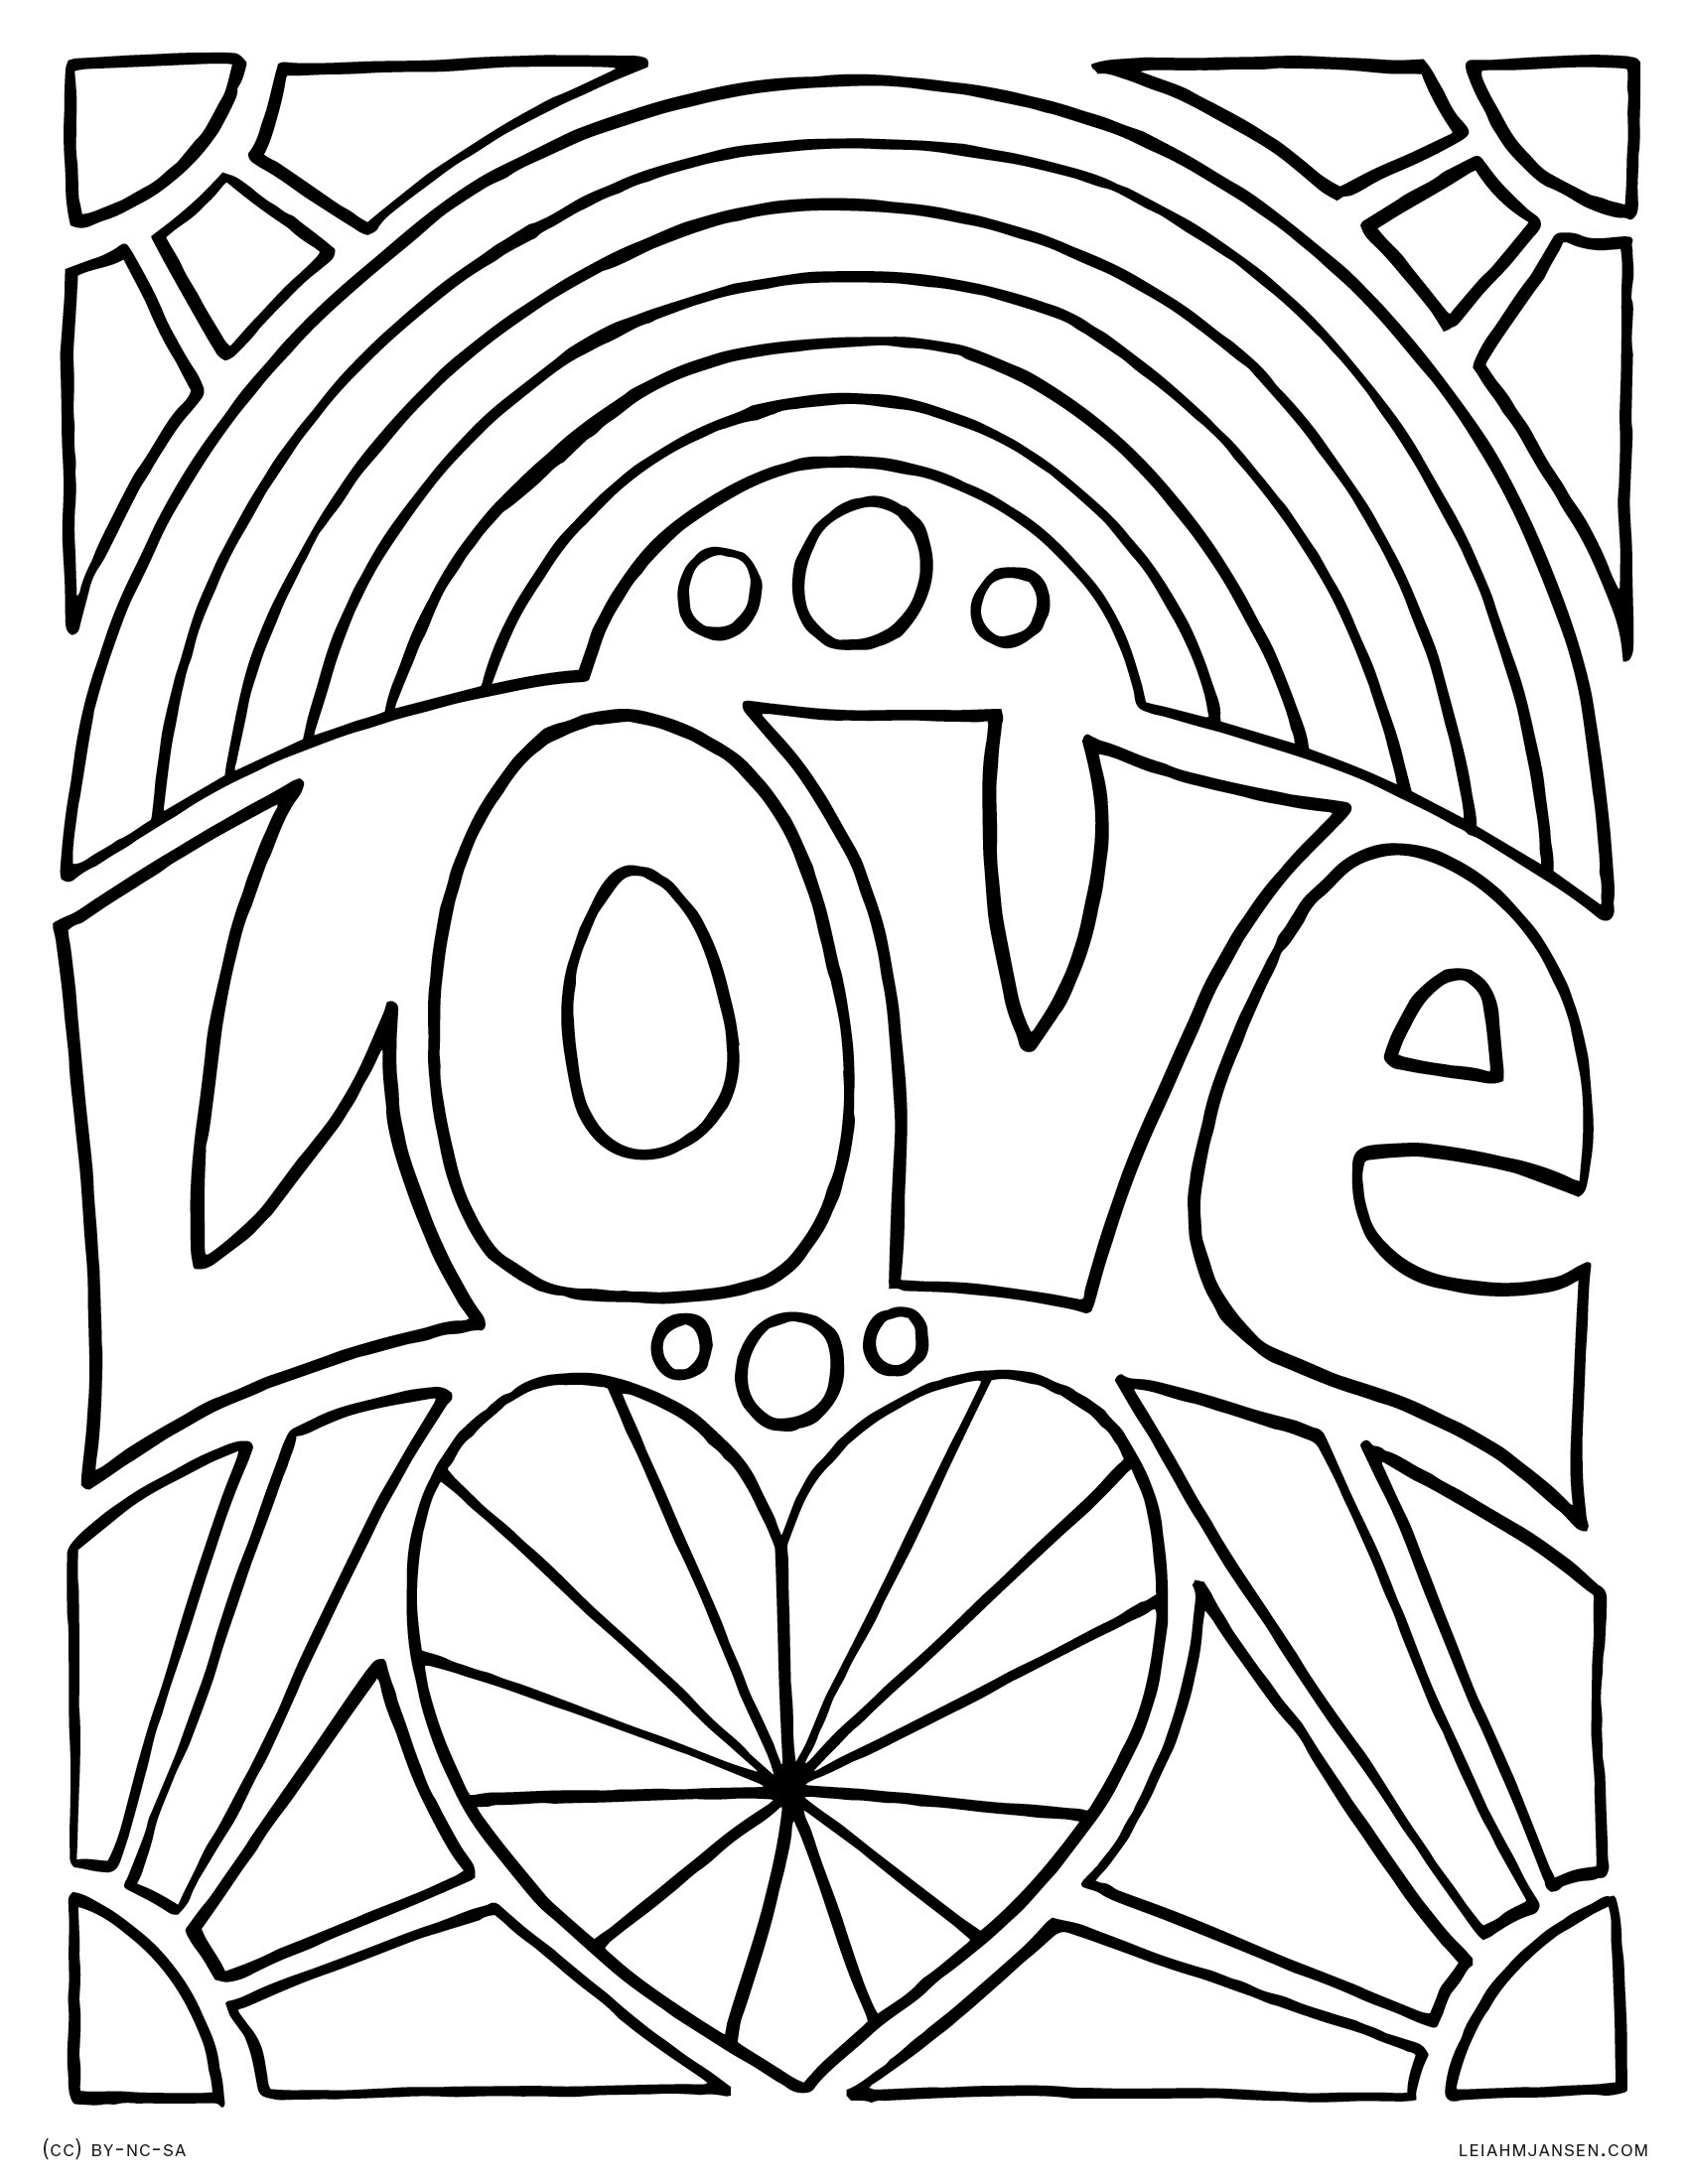 Rainbow Coloring Pages For Adults
 Coloring Pages